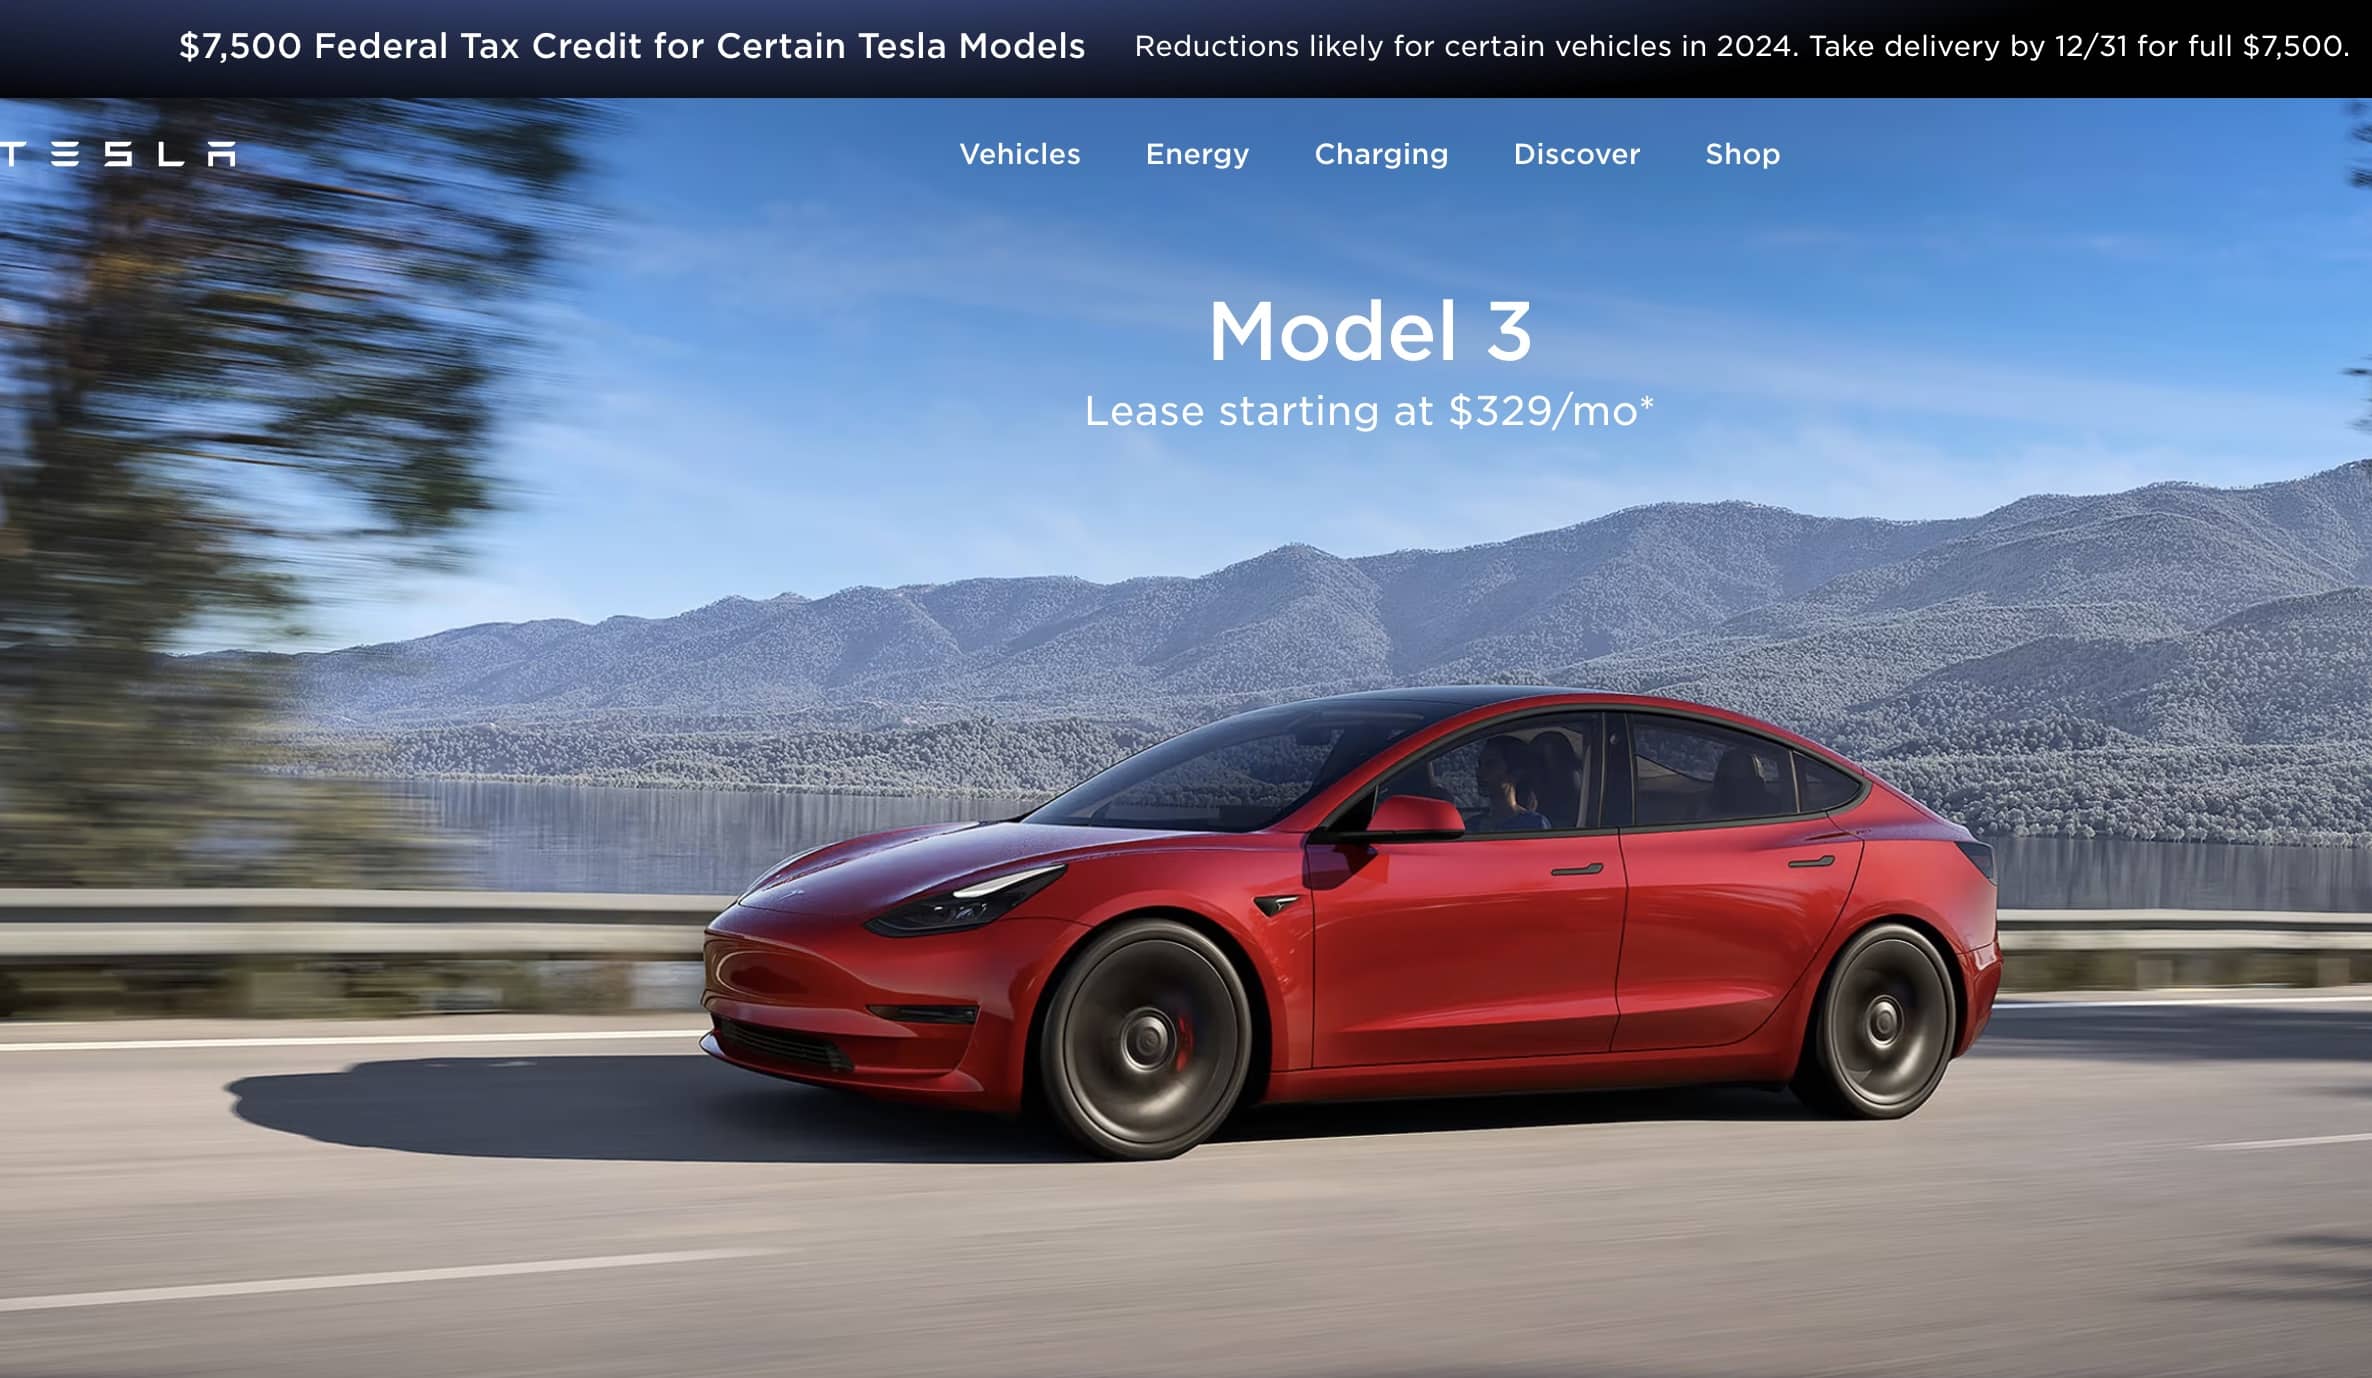 Certain Tesla Model 3 Configurations to Face a 7,500 Reduction in Tax